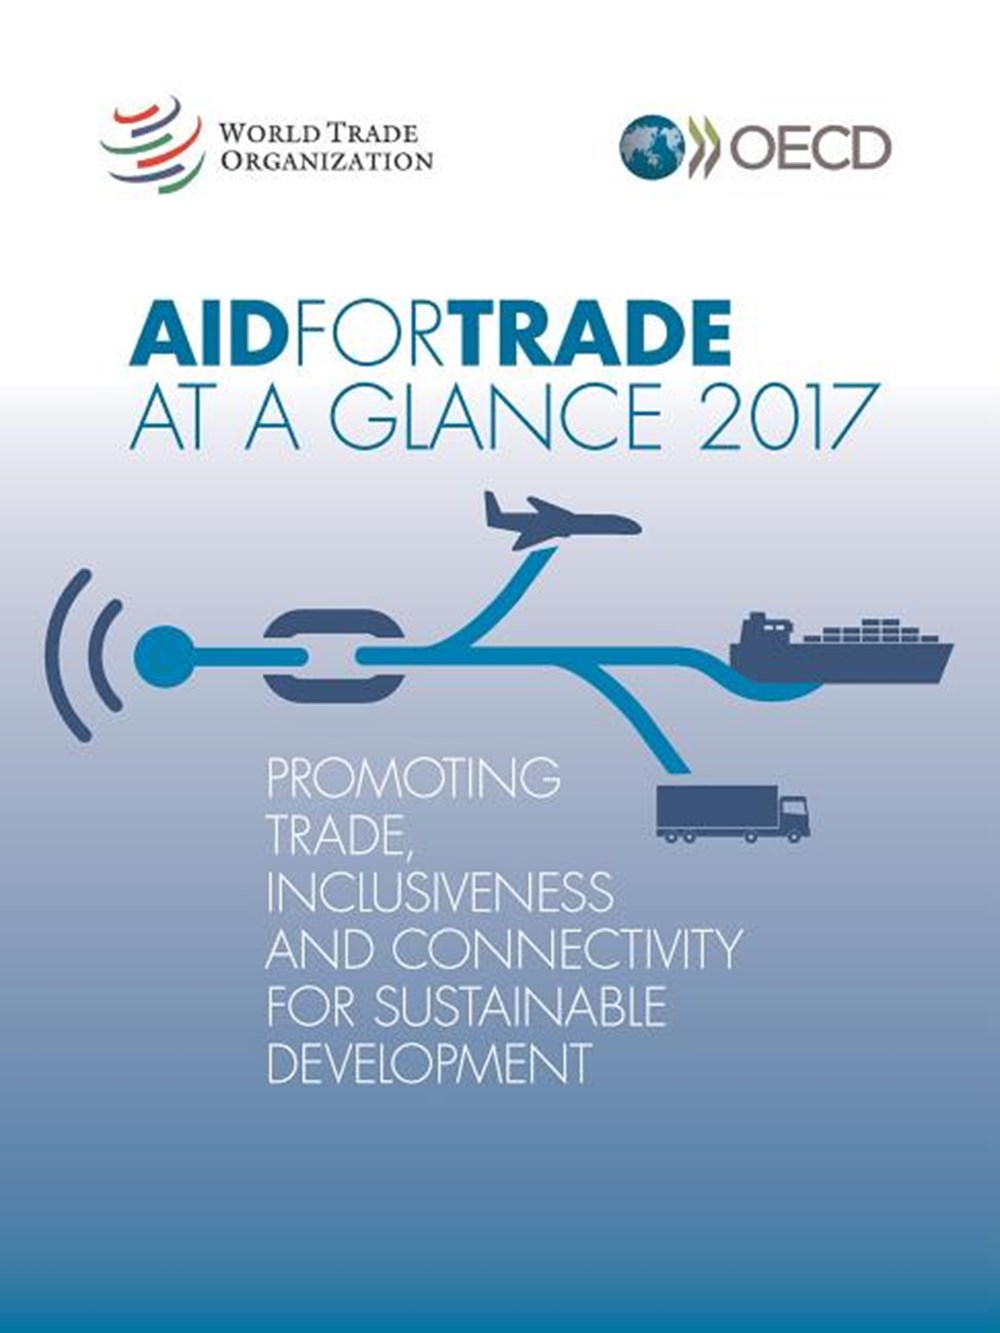 Aid for Trade at a Glance 2017: Promoting Trade, Inclusiveness and Connectivity for Sustainable Deve